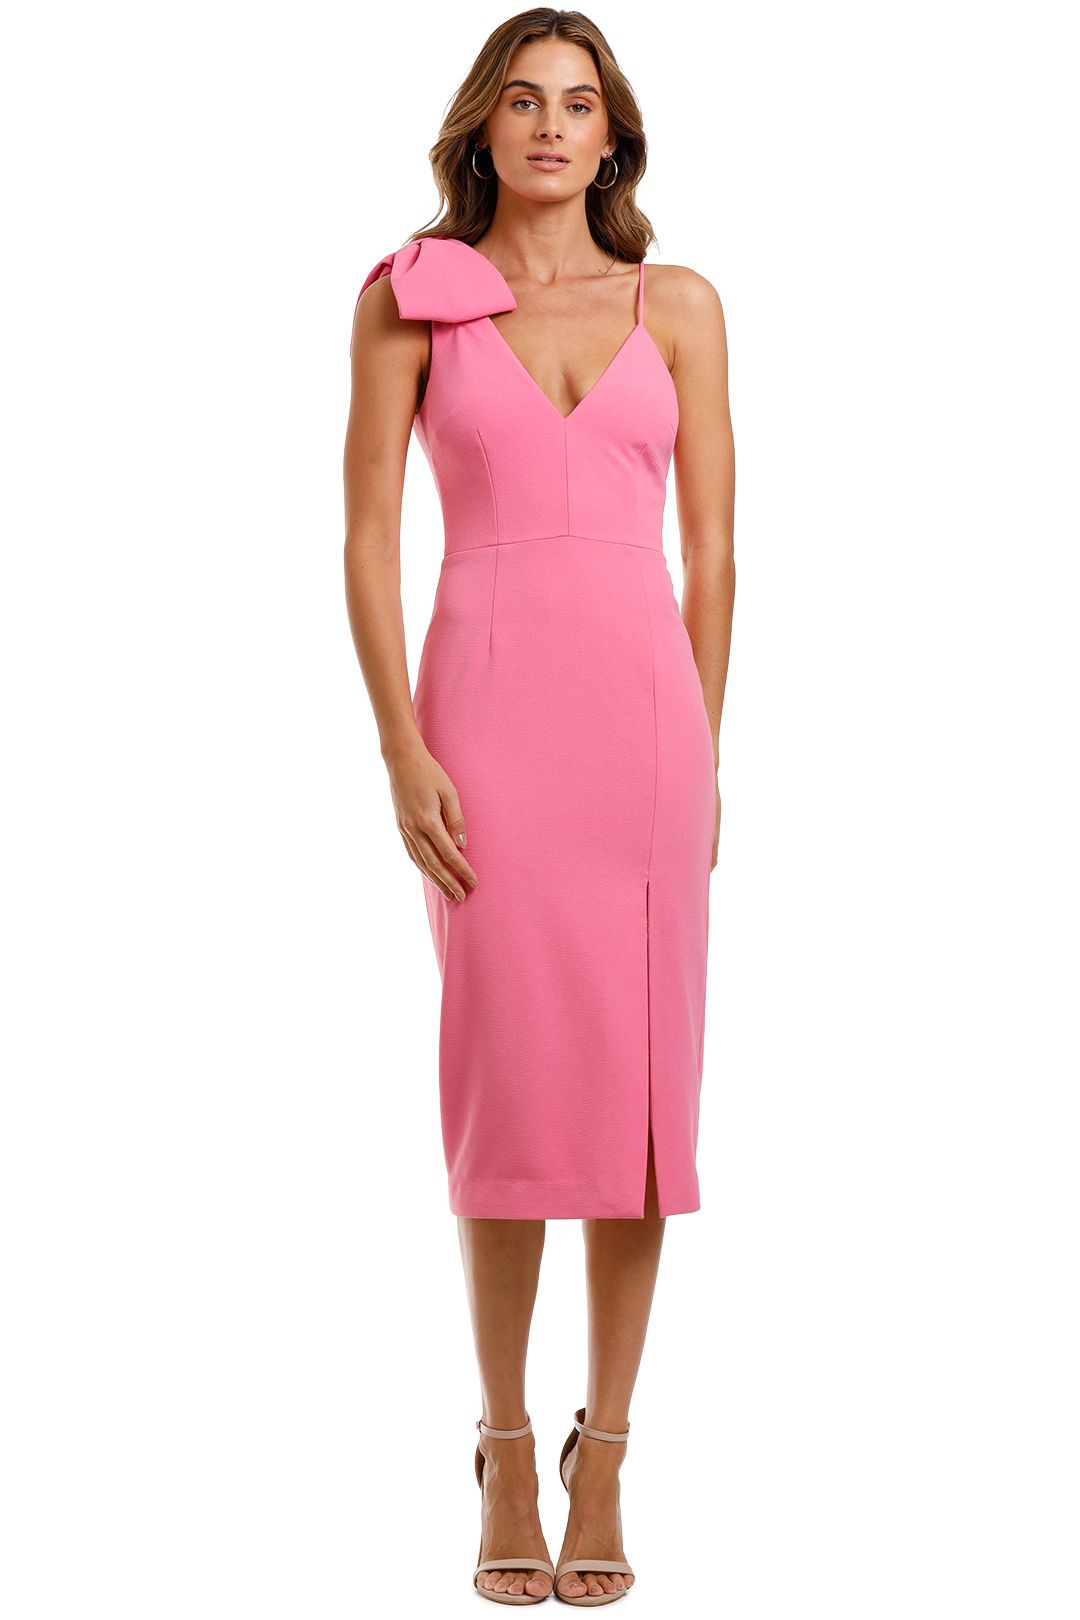 Love Bow Dress in Pink by Rebecca ...